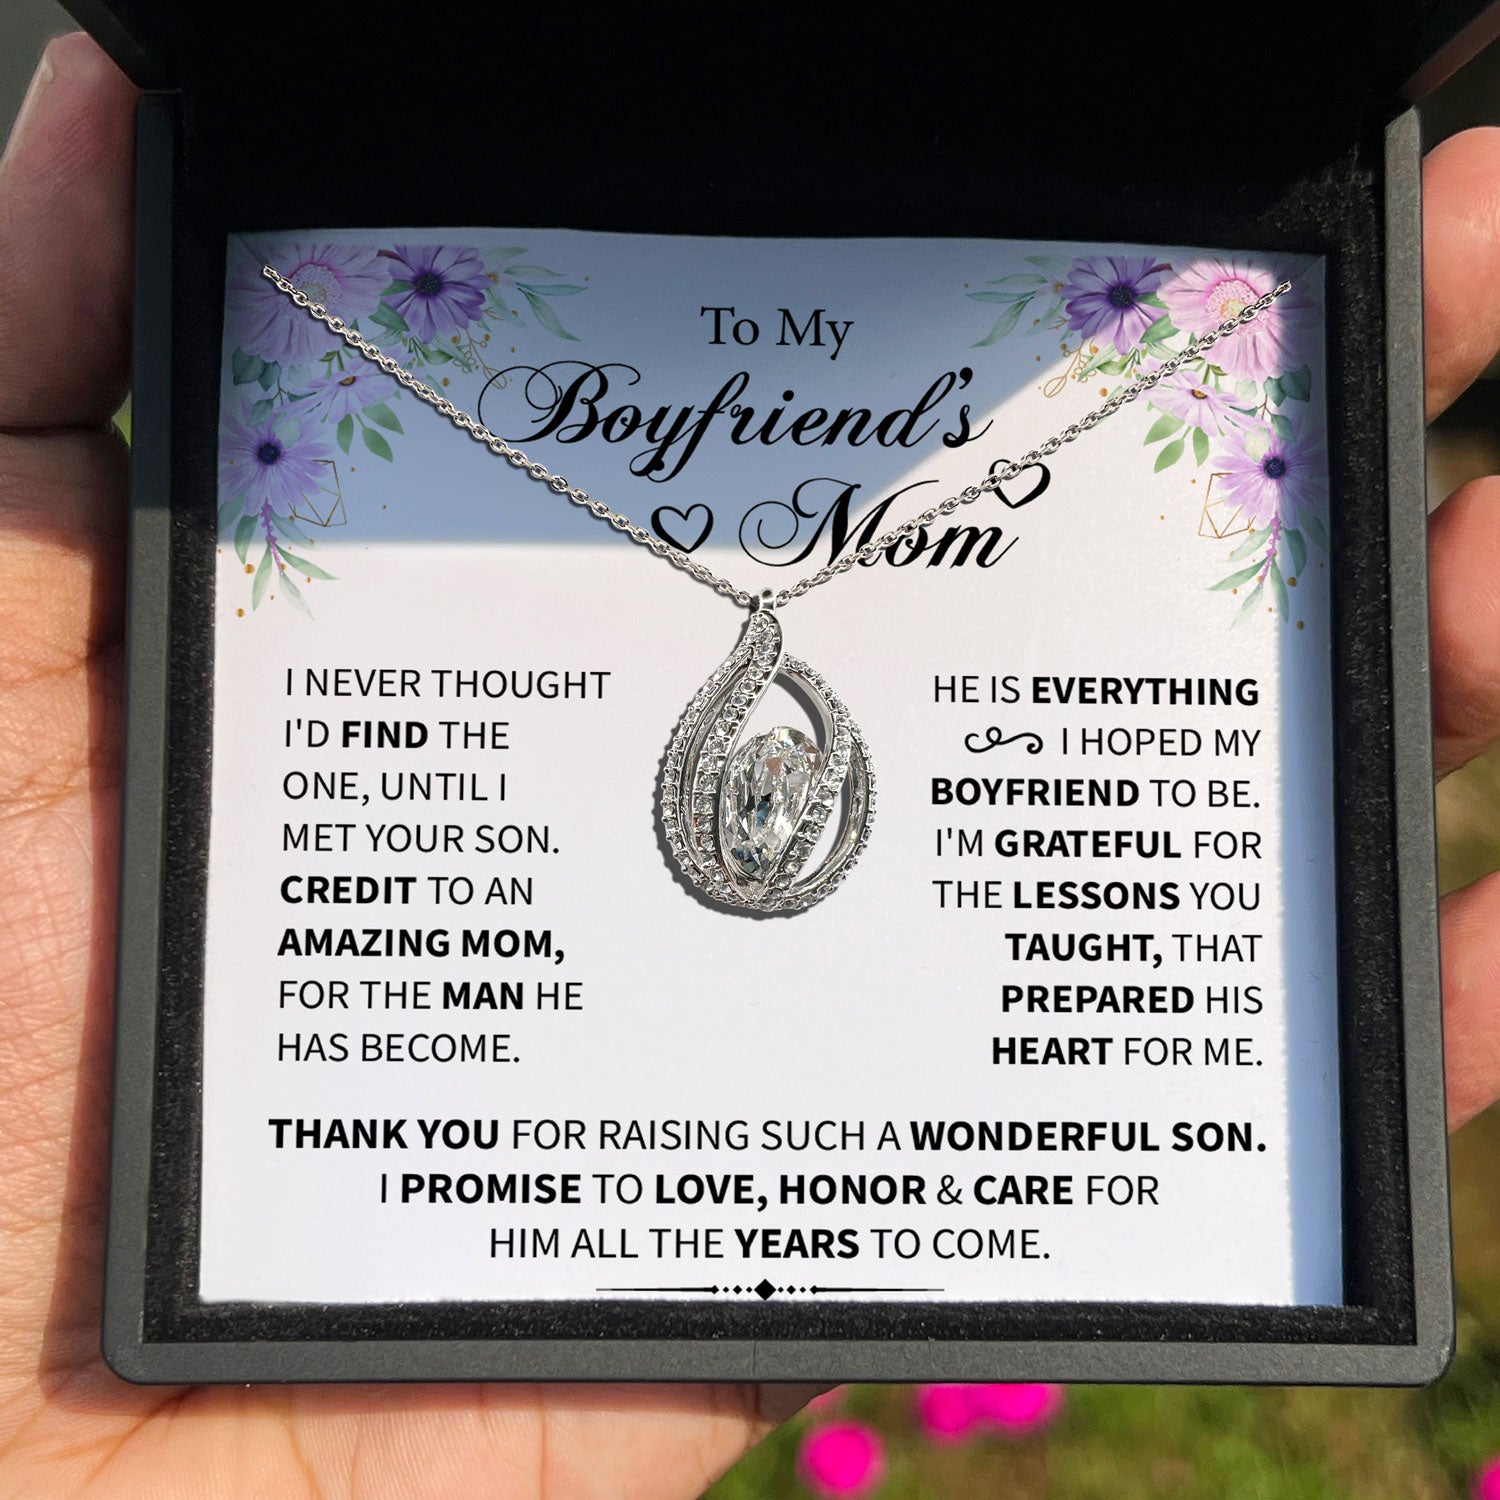 To My Boyfriend's Mom - I'm Grateful For The Lessons You Taught - Orbital Birdcage Necklace